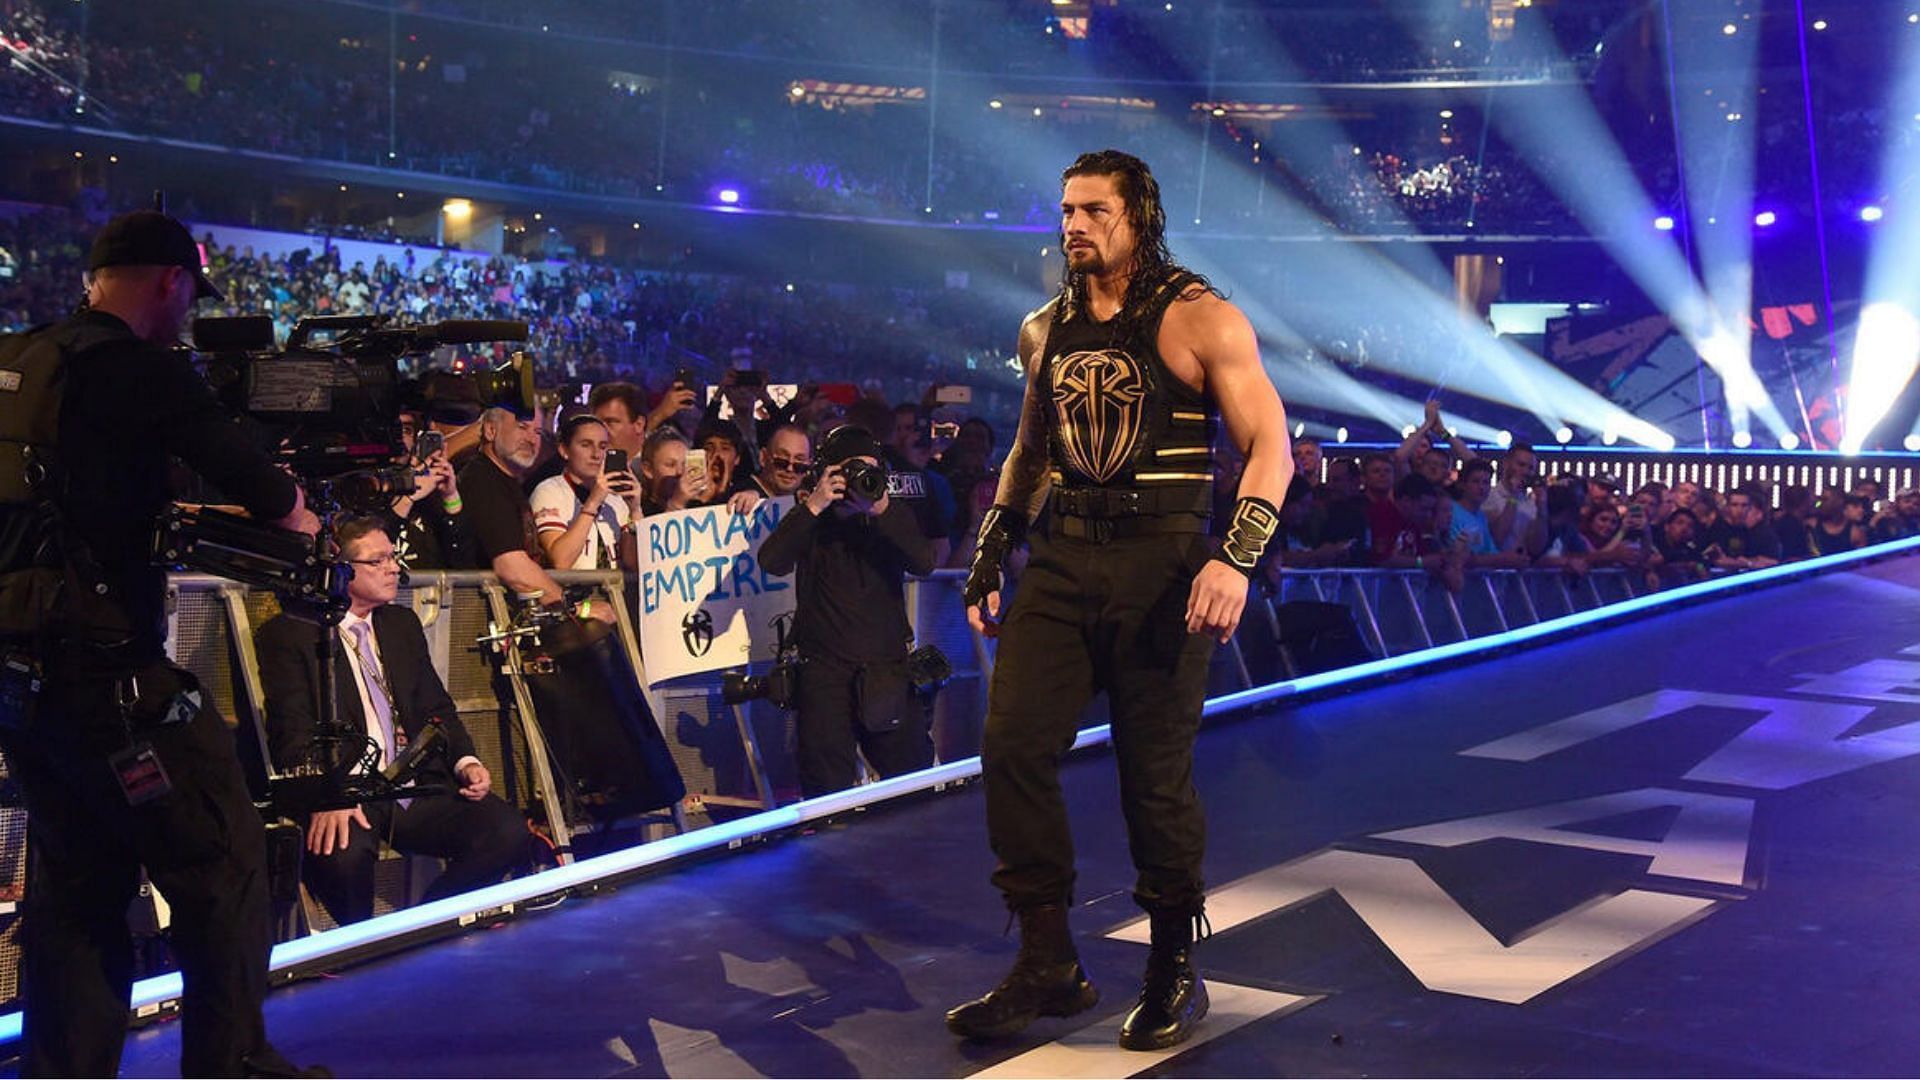 Roman Reigns has been at WrestleMania many times.